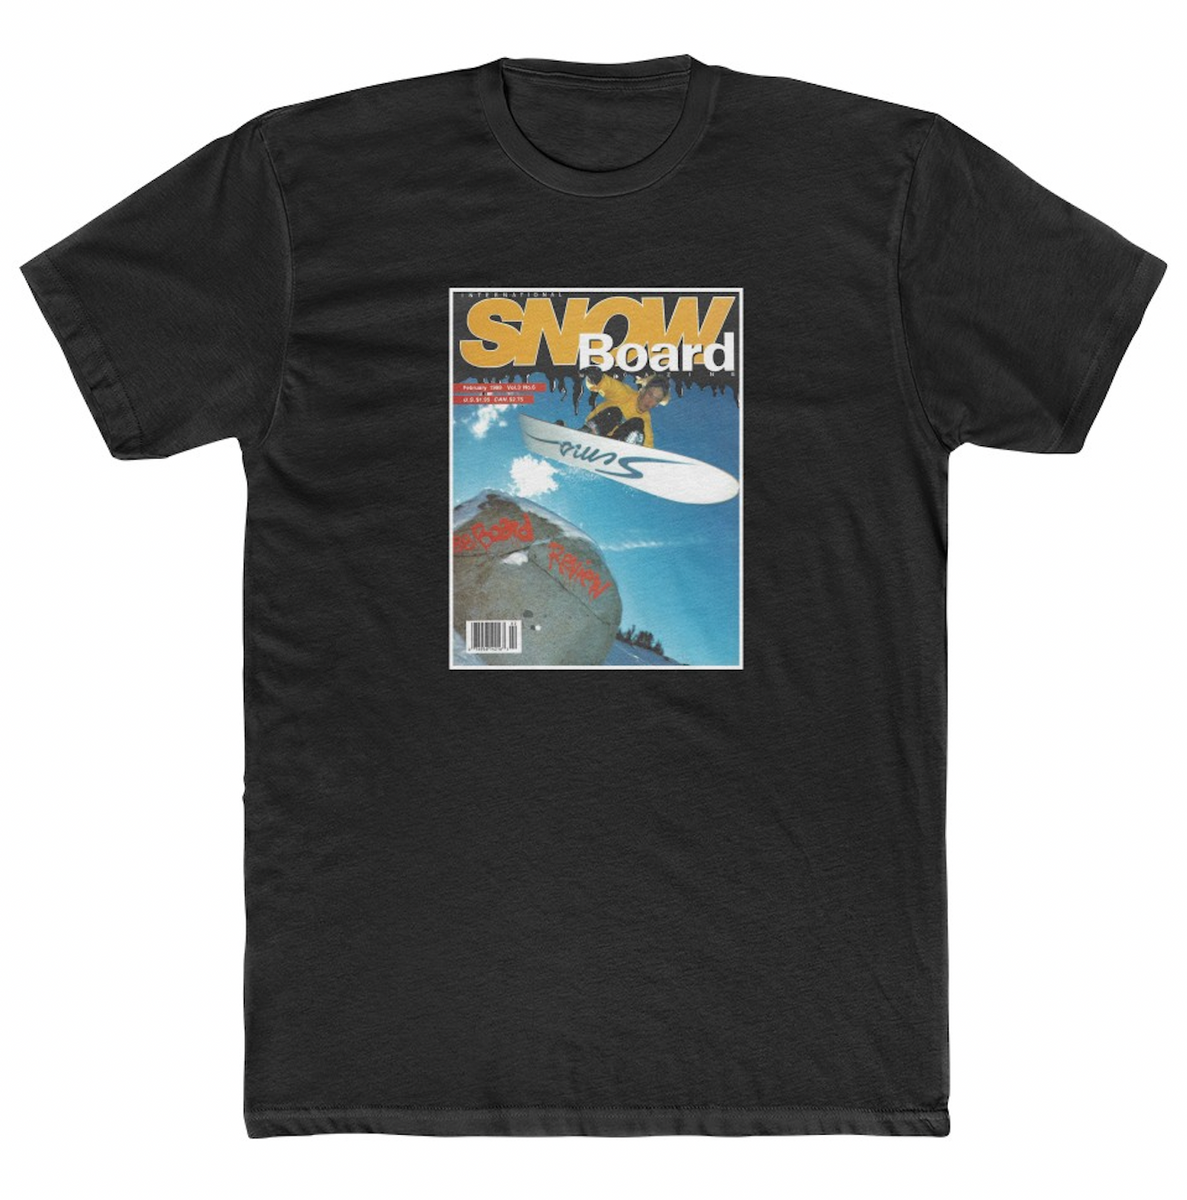 ISM/Palmer Cover Snowboarder T Shirt - 45RPM Vintage